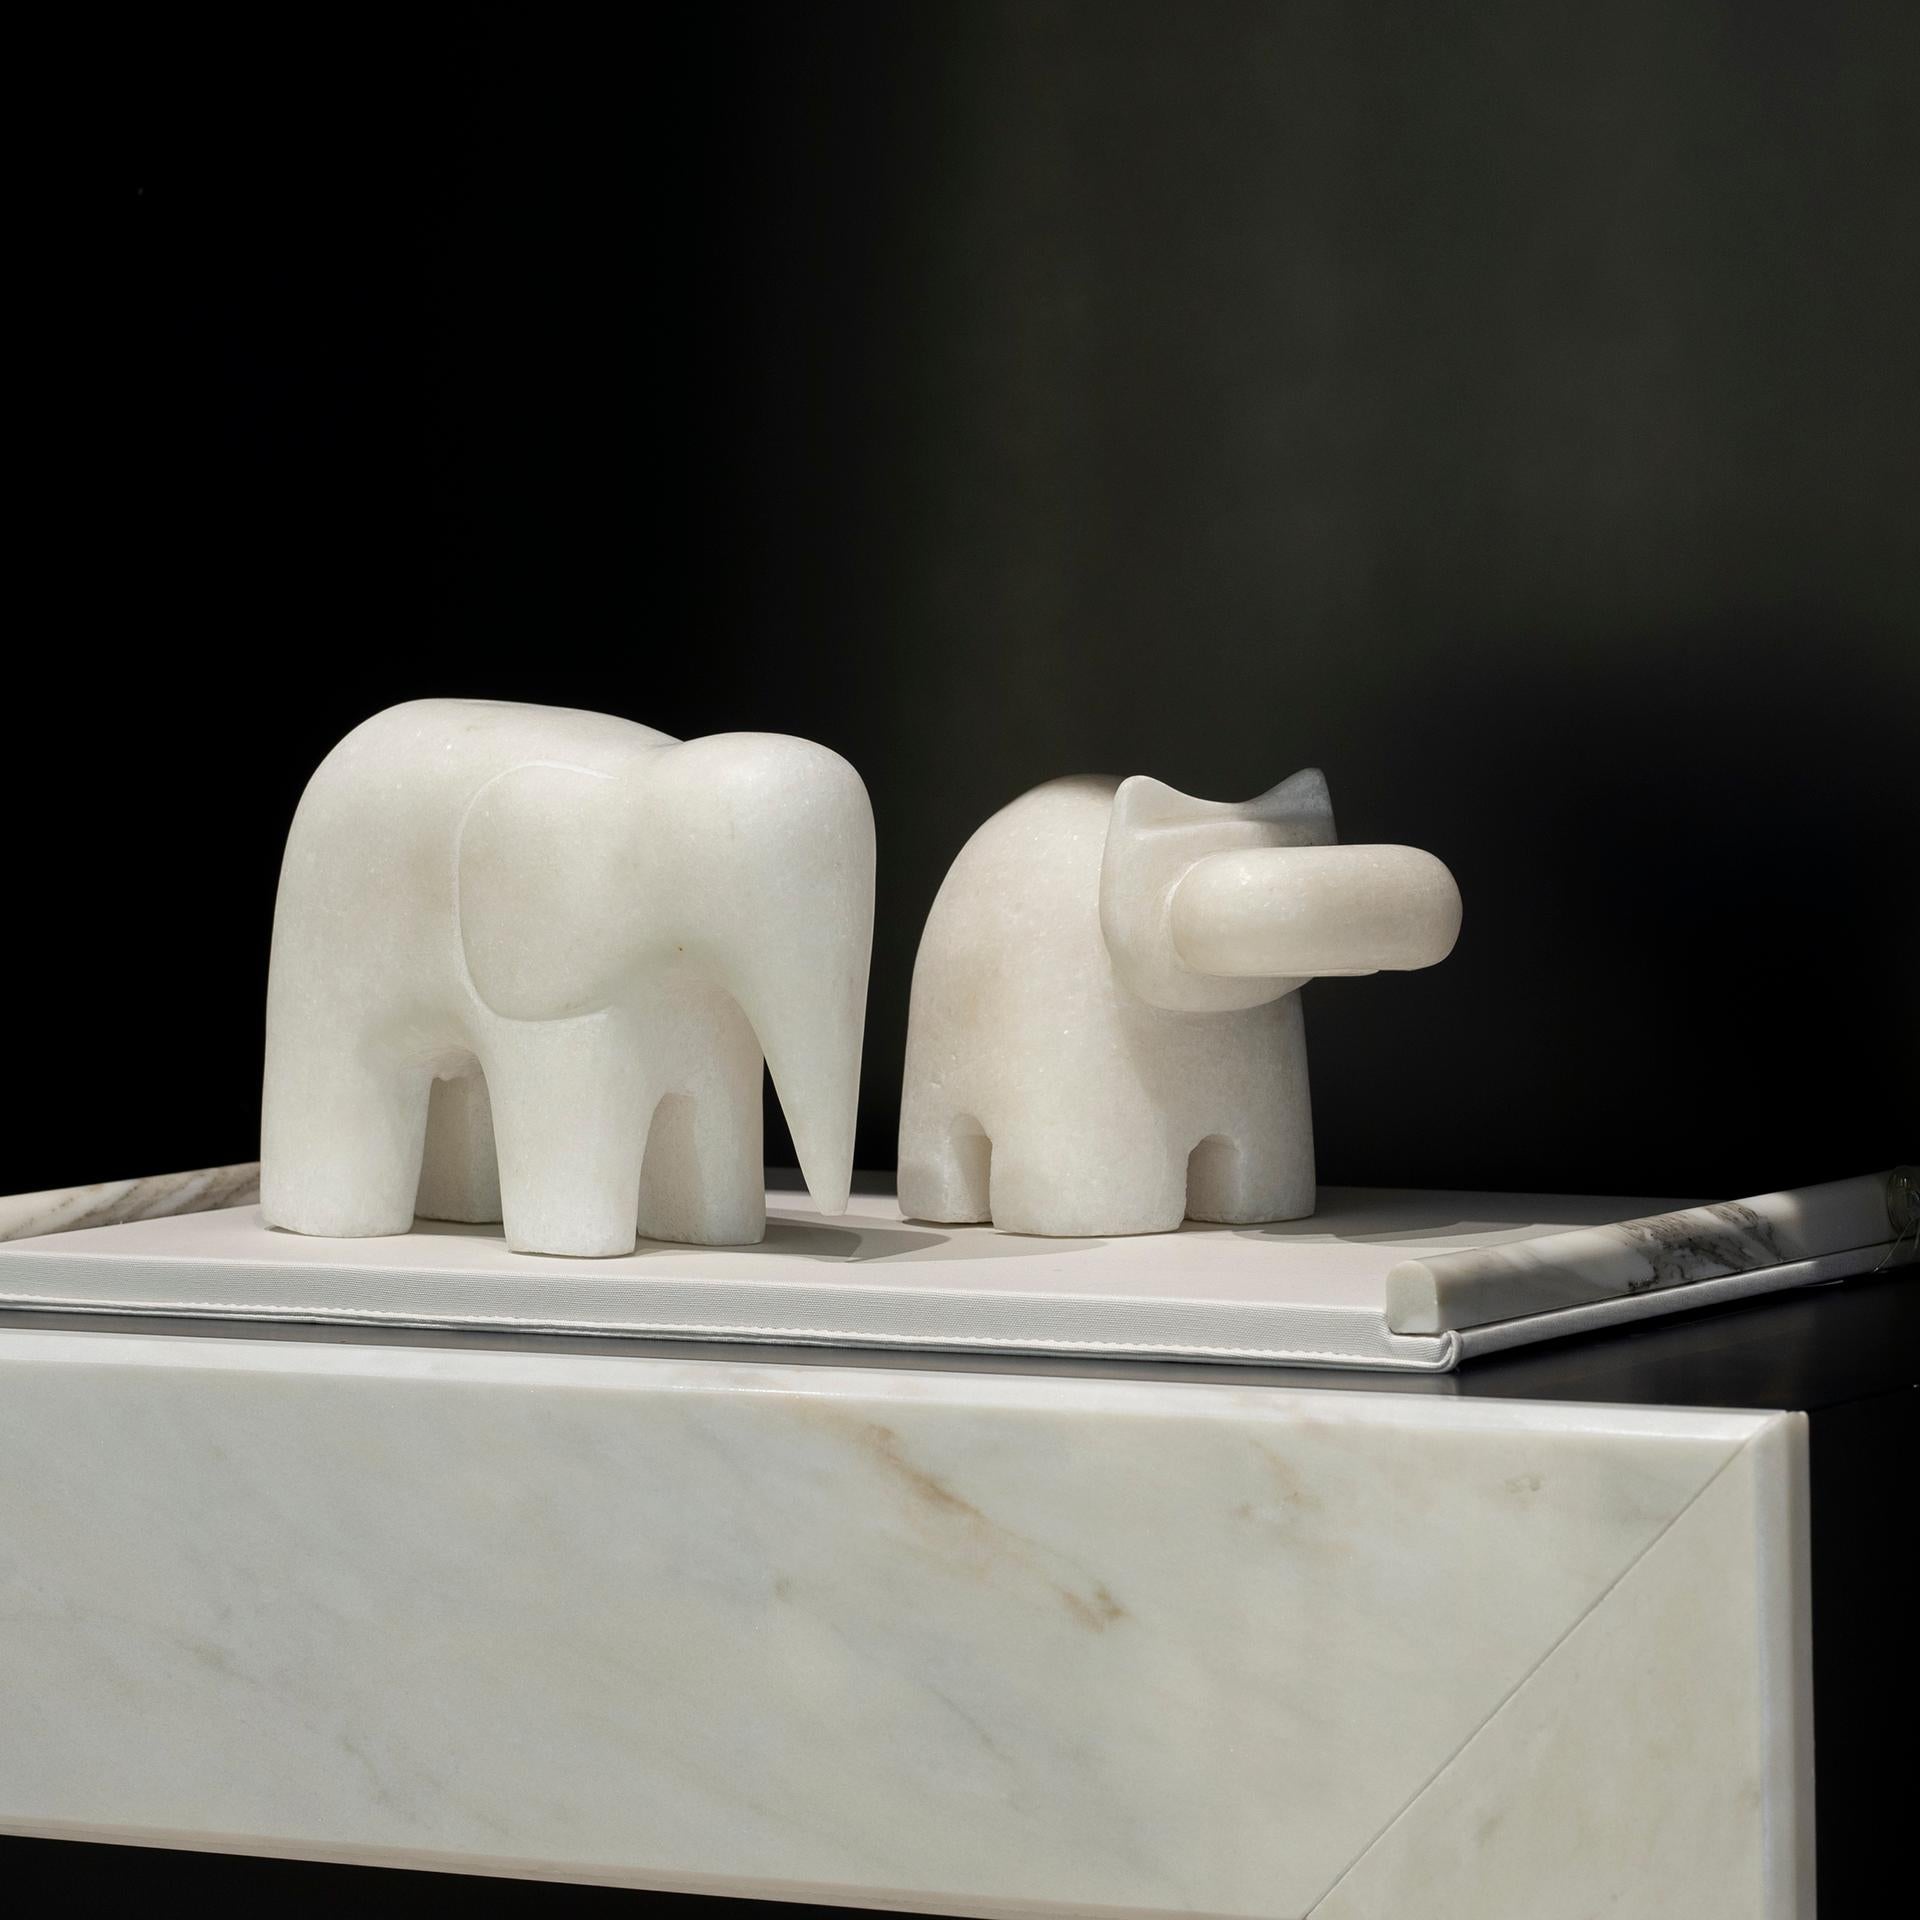 Set/3 Animals Pigmeo, Calacatta Bianco Marble, Lusitanus Home Collection by Lusitanus Home.

Handcrafted animal sculptures in Calacatta Bianco Marble, designed to enhance your home decor. A creative work from ancient China that requires precision